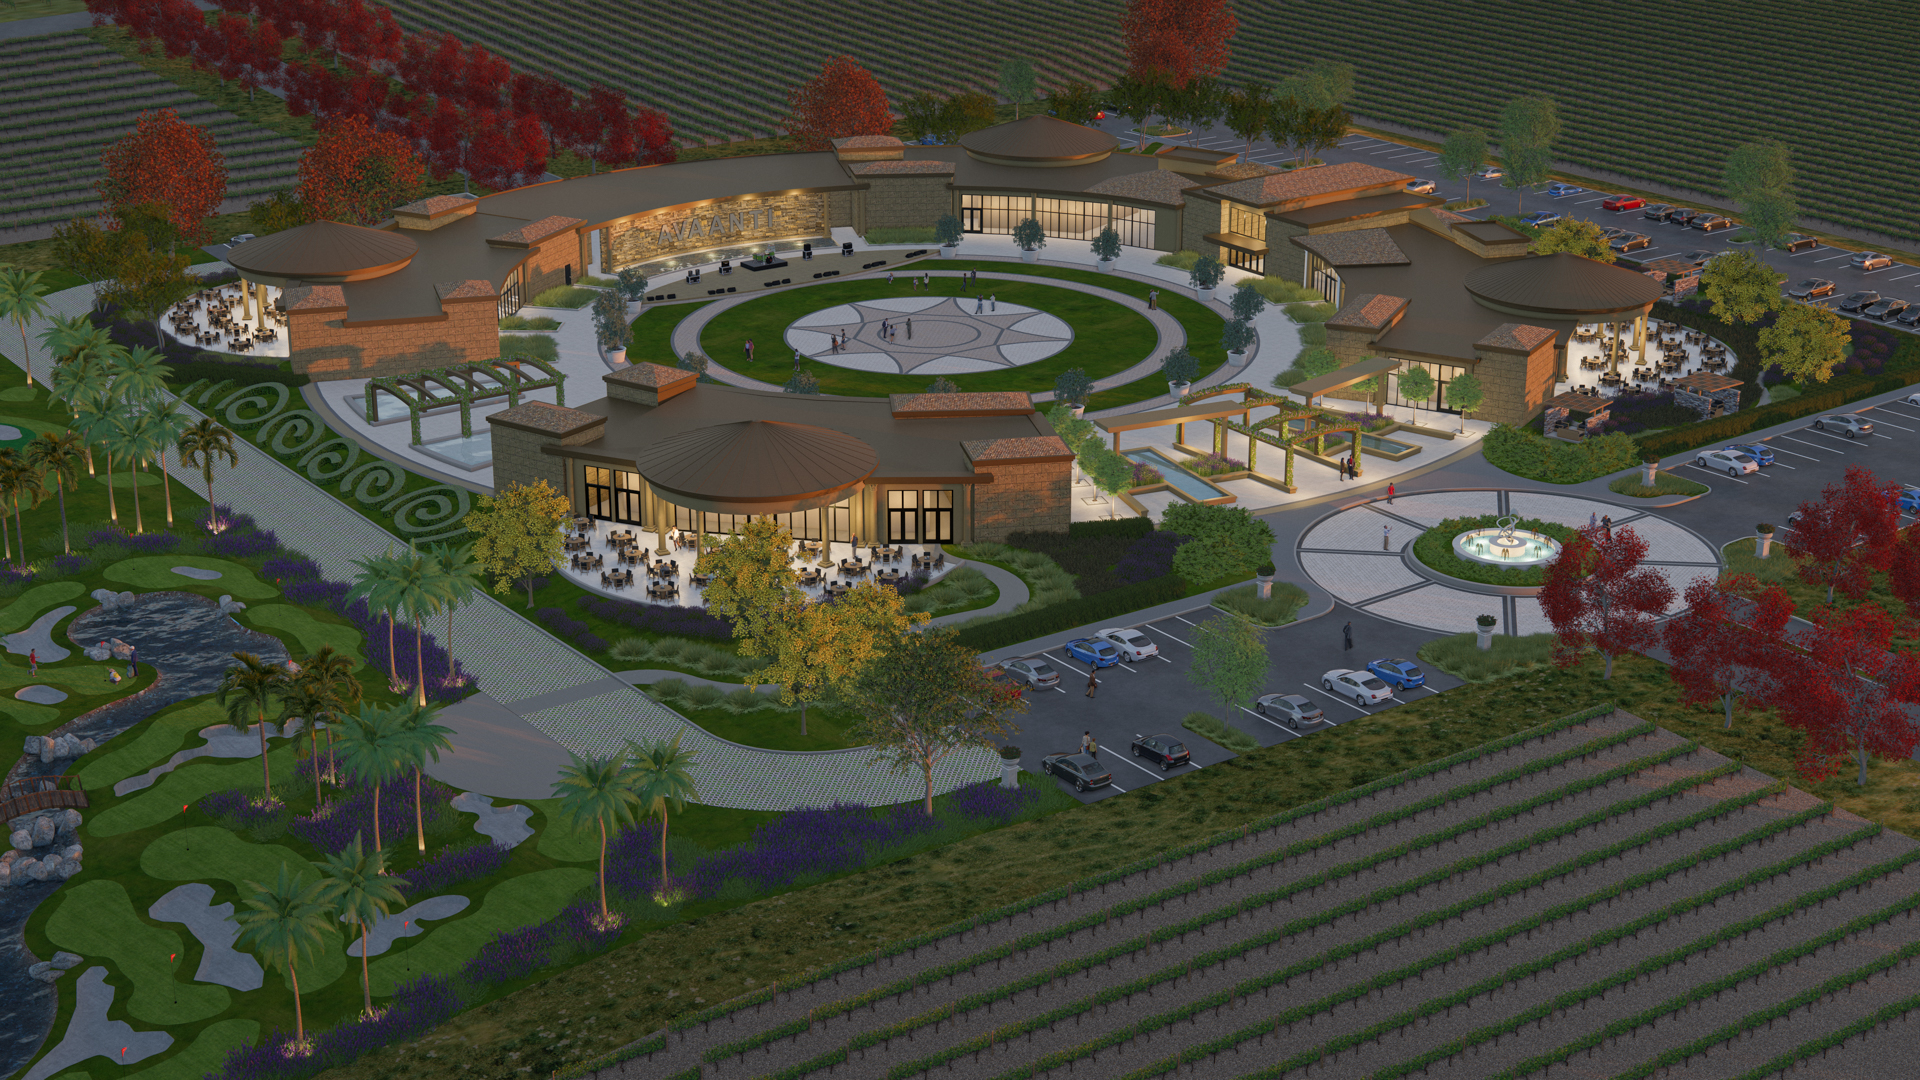 Avaanti Vineyard Event Center and Residence - Commercial - Hospitality 7942-AvaantiVineyard-EventCenter-and-AvaantiVineyard-Residence-dv5-dusk-2K.jpg